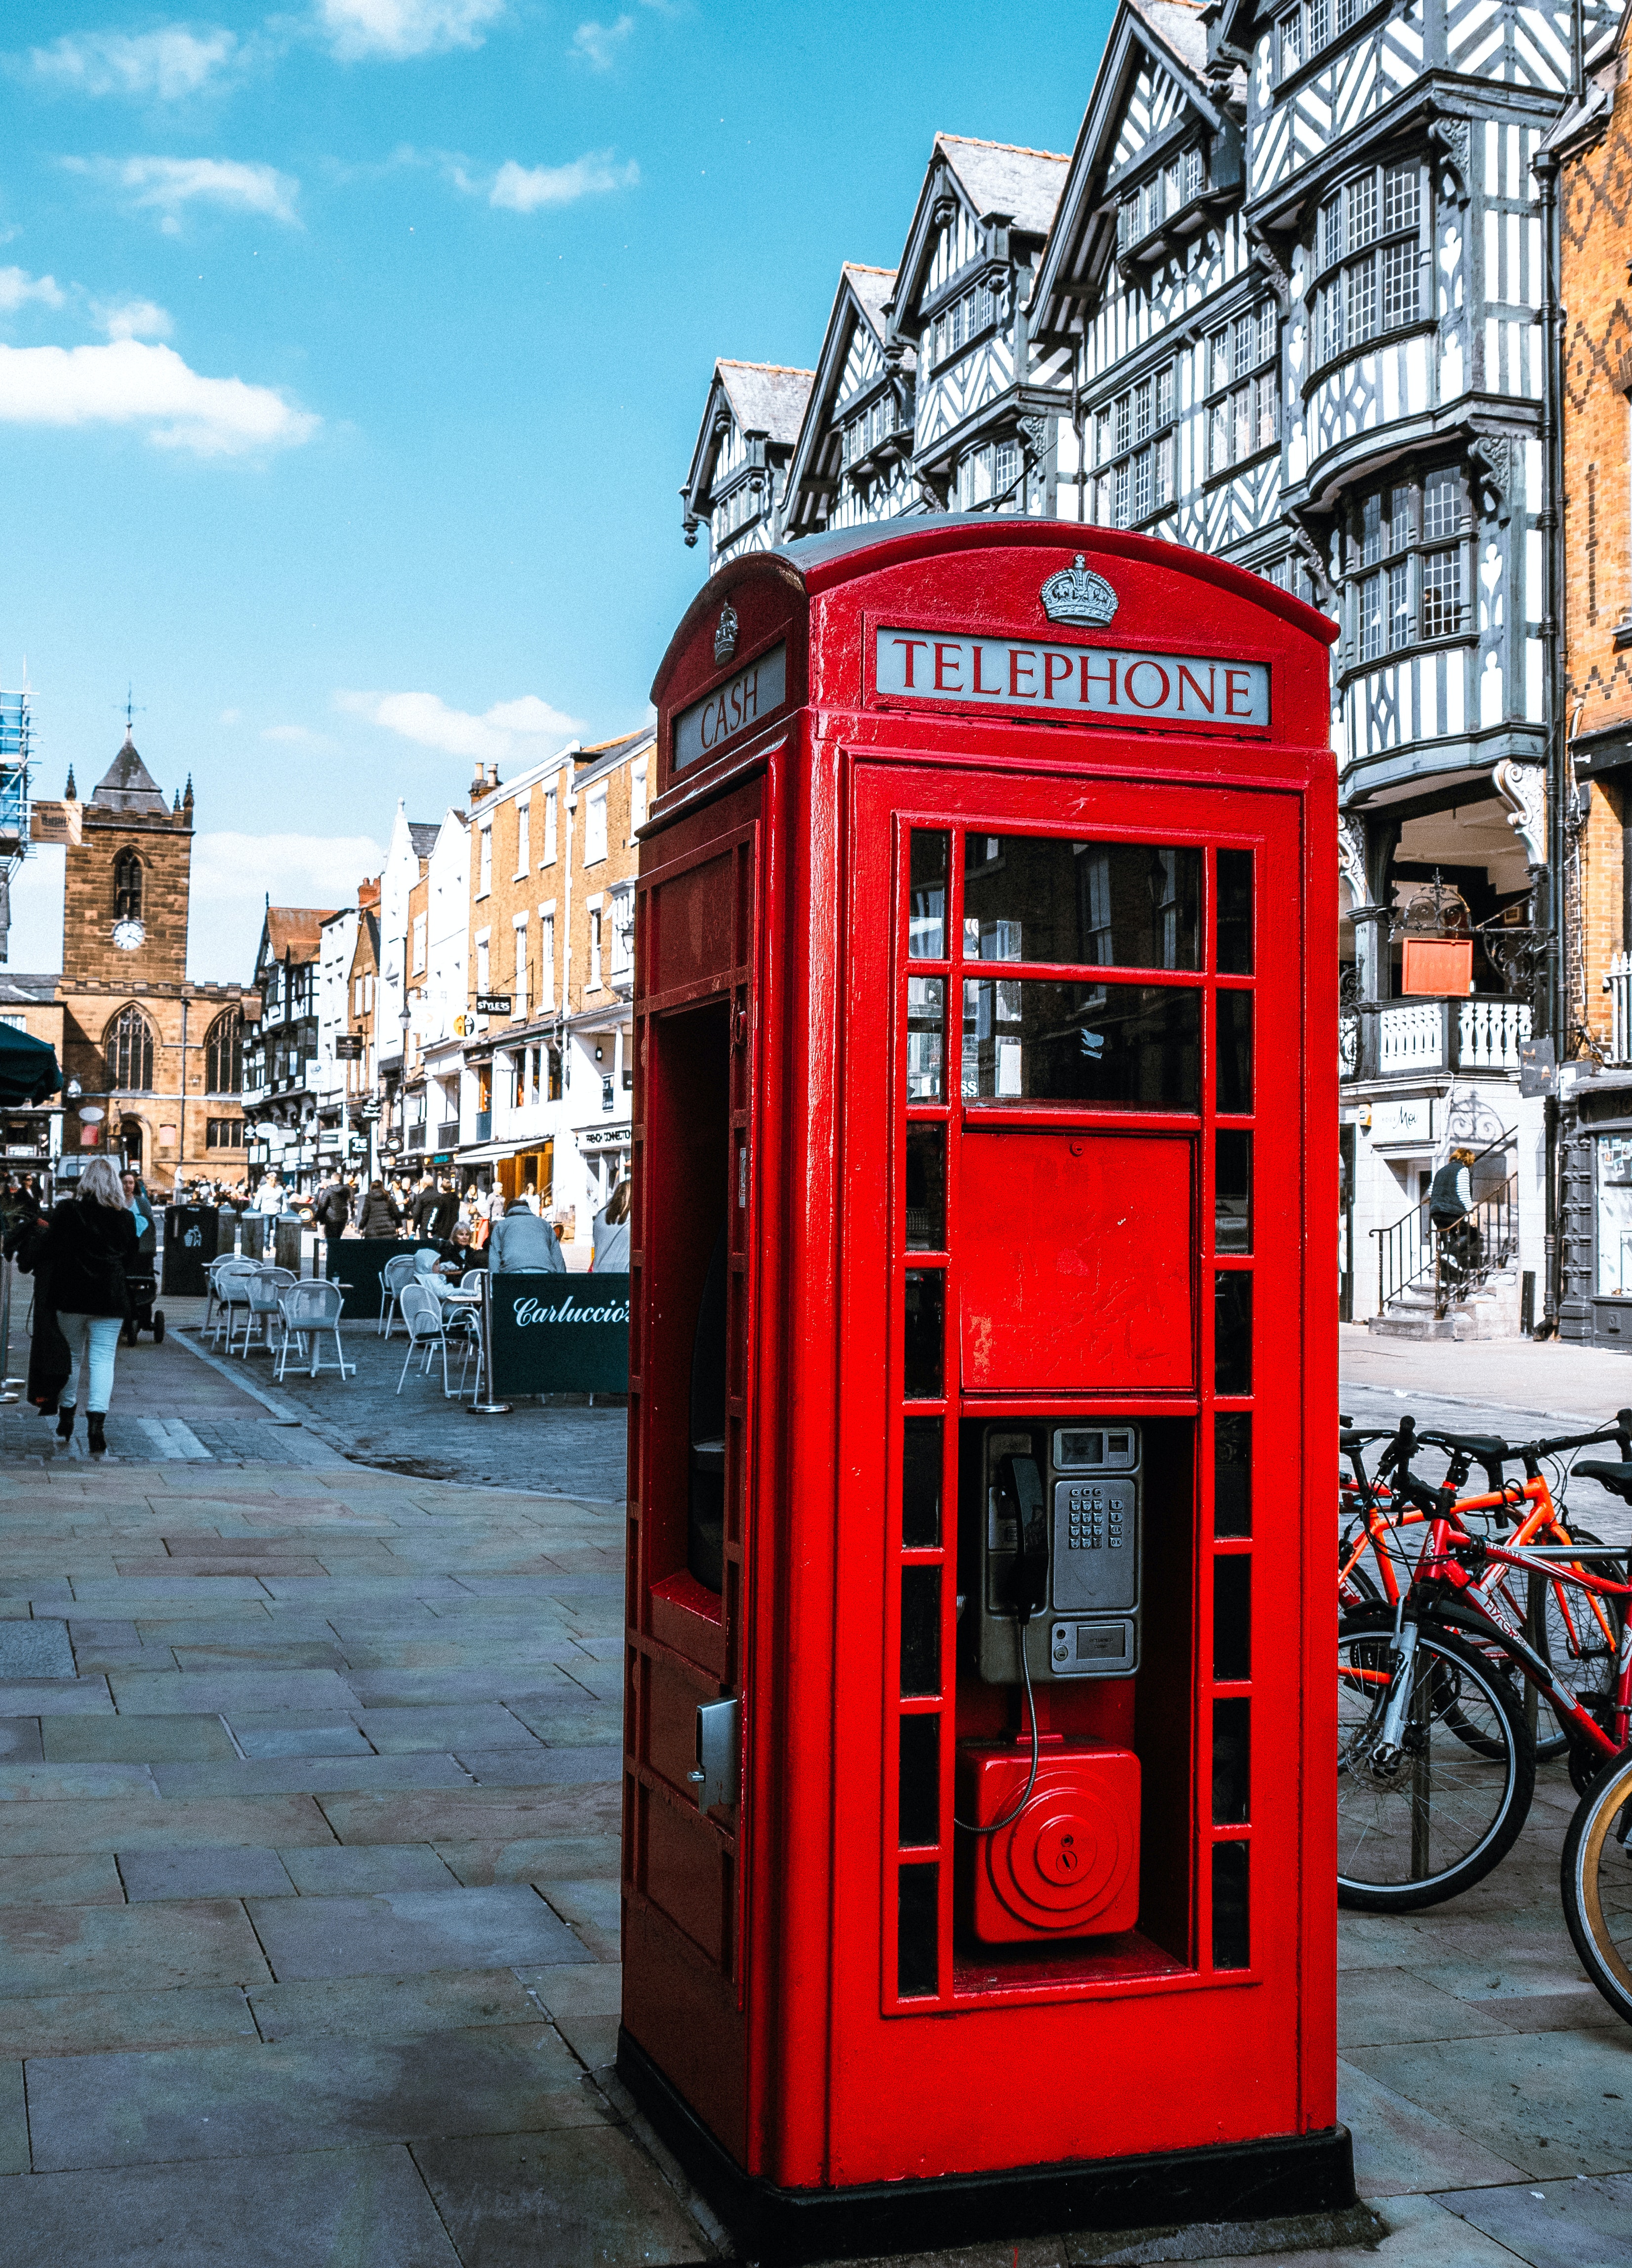 A red telephone booth in the UK